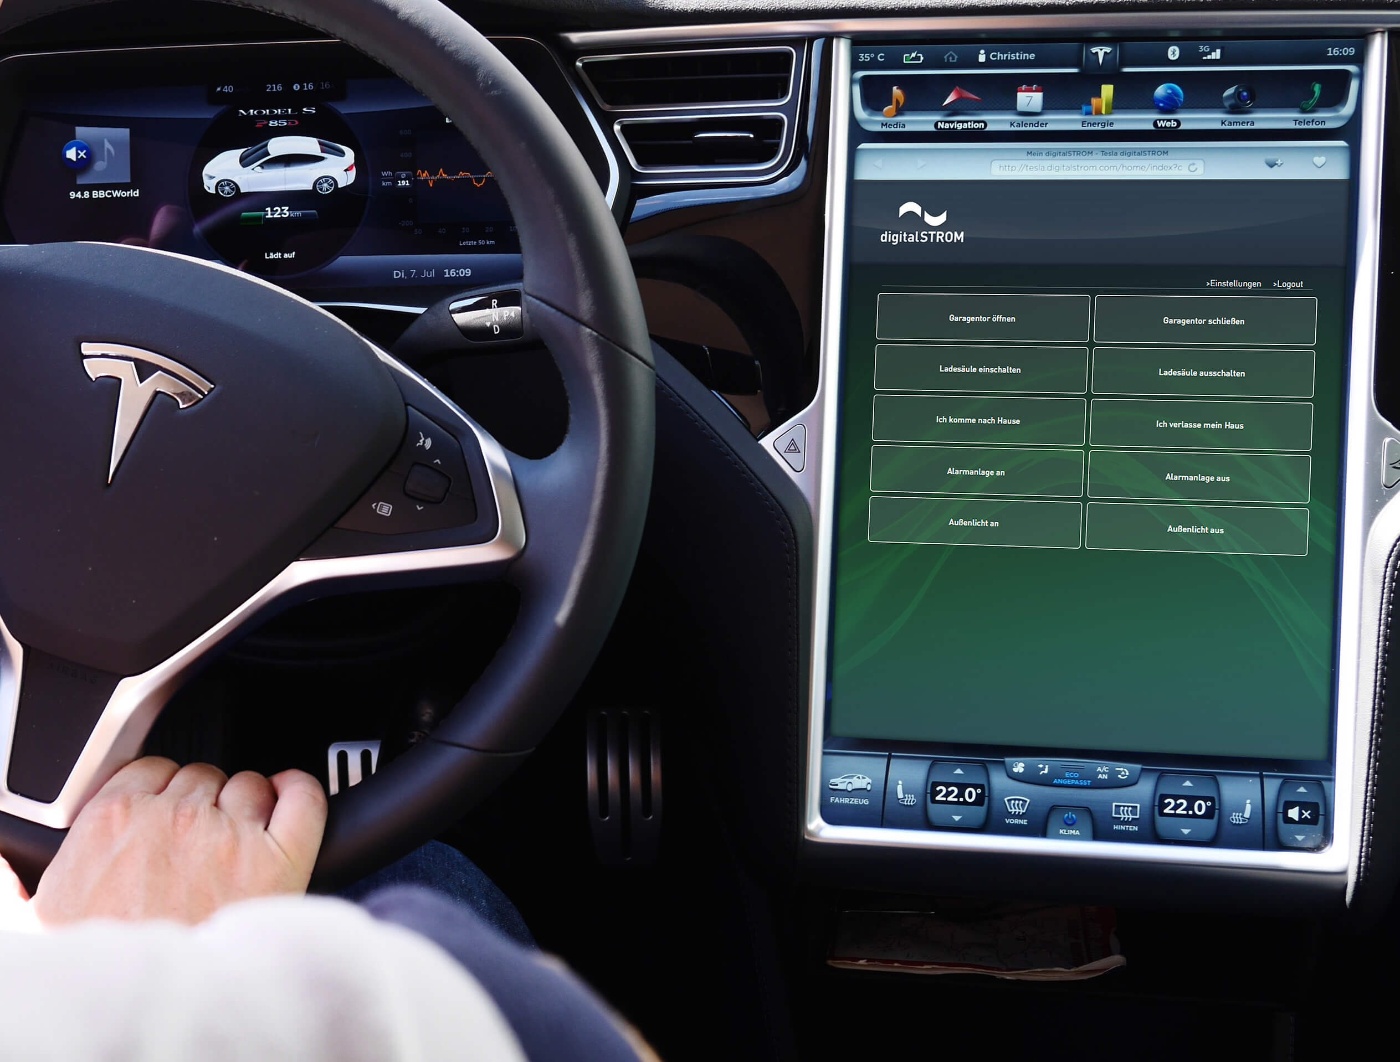 Some smart home applications could already be controlled via browser in Tesla cars in 2015. © digitalSTROM 